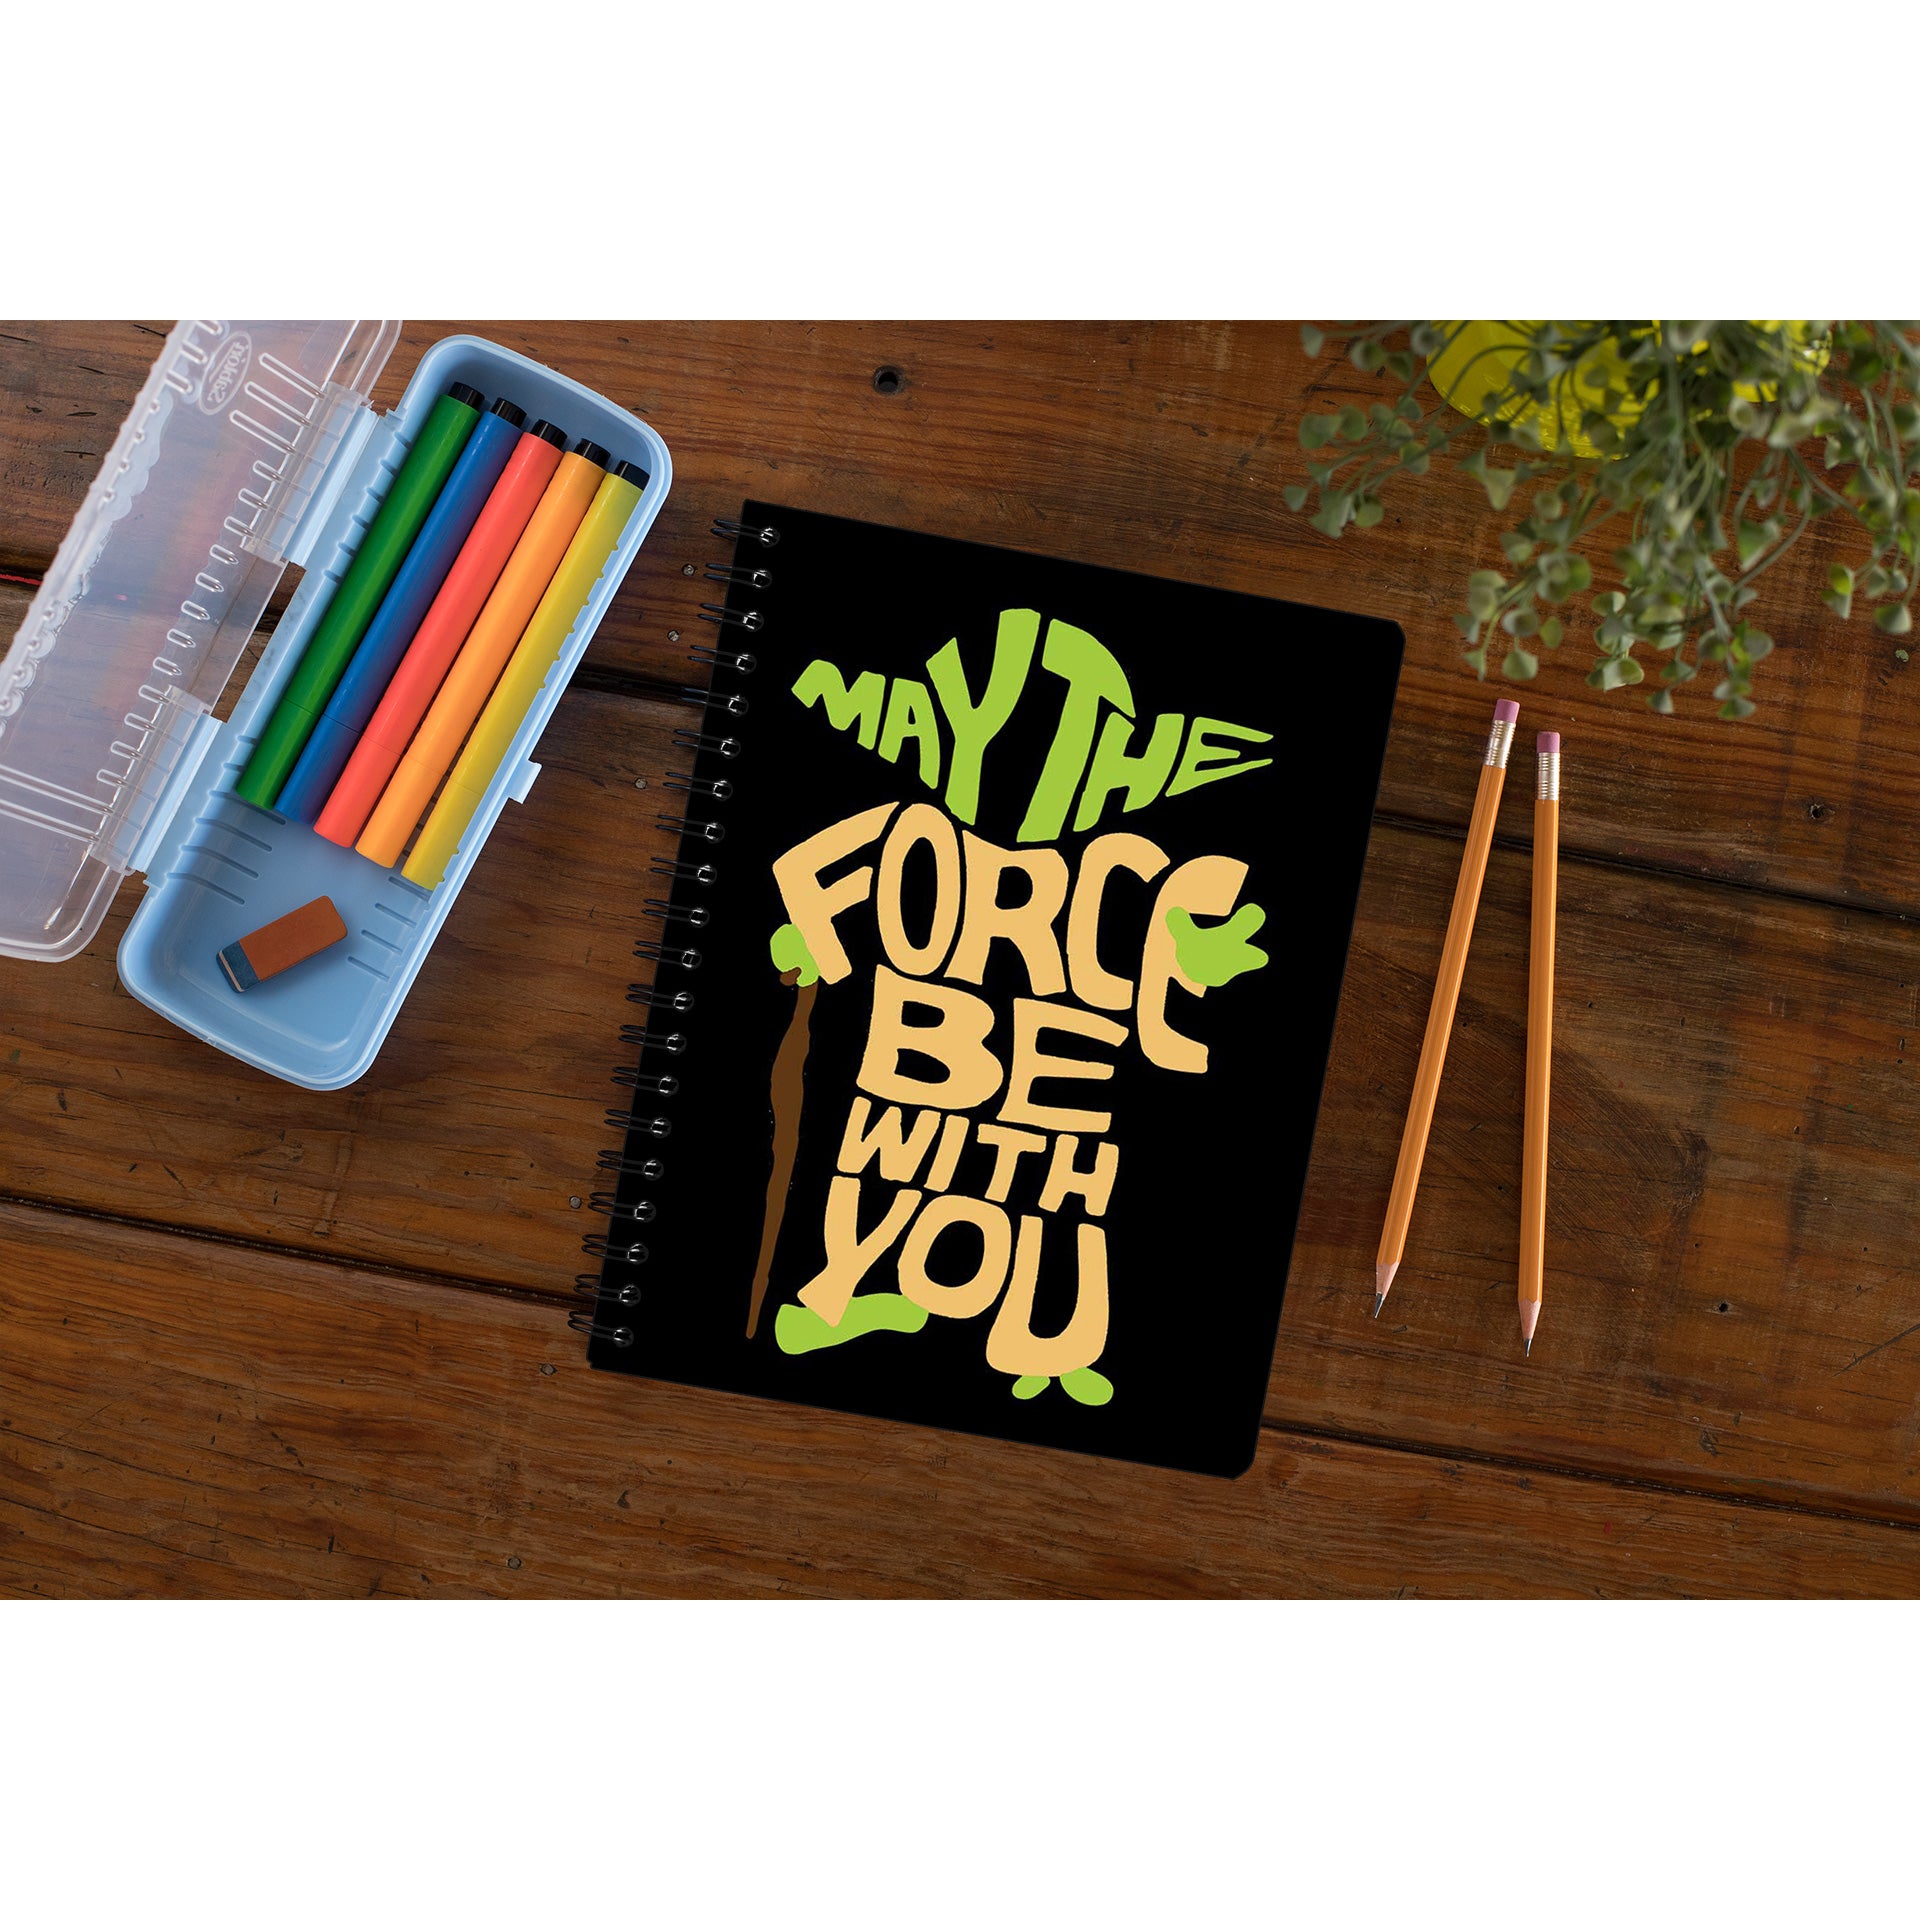 star wars may the force be with you notebook notepad diary buy online india the banyan tee tbt unruled yoda